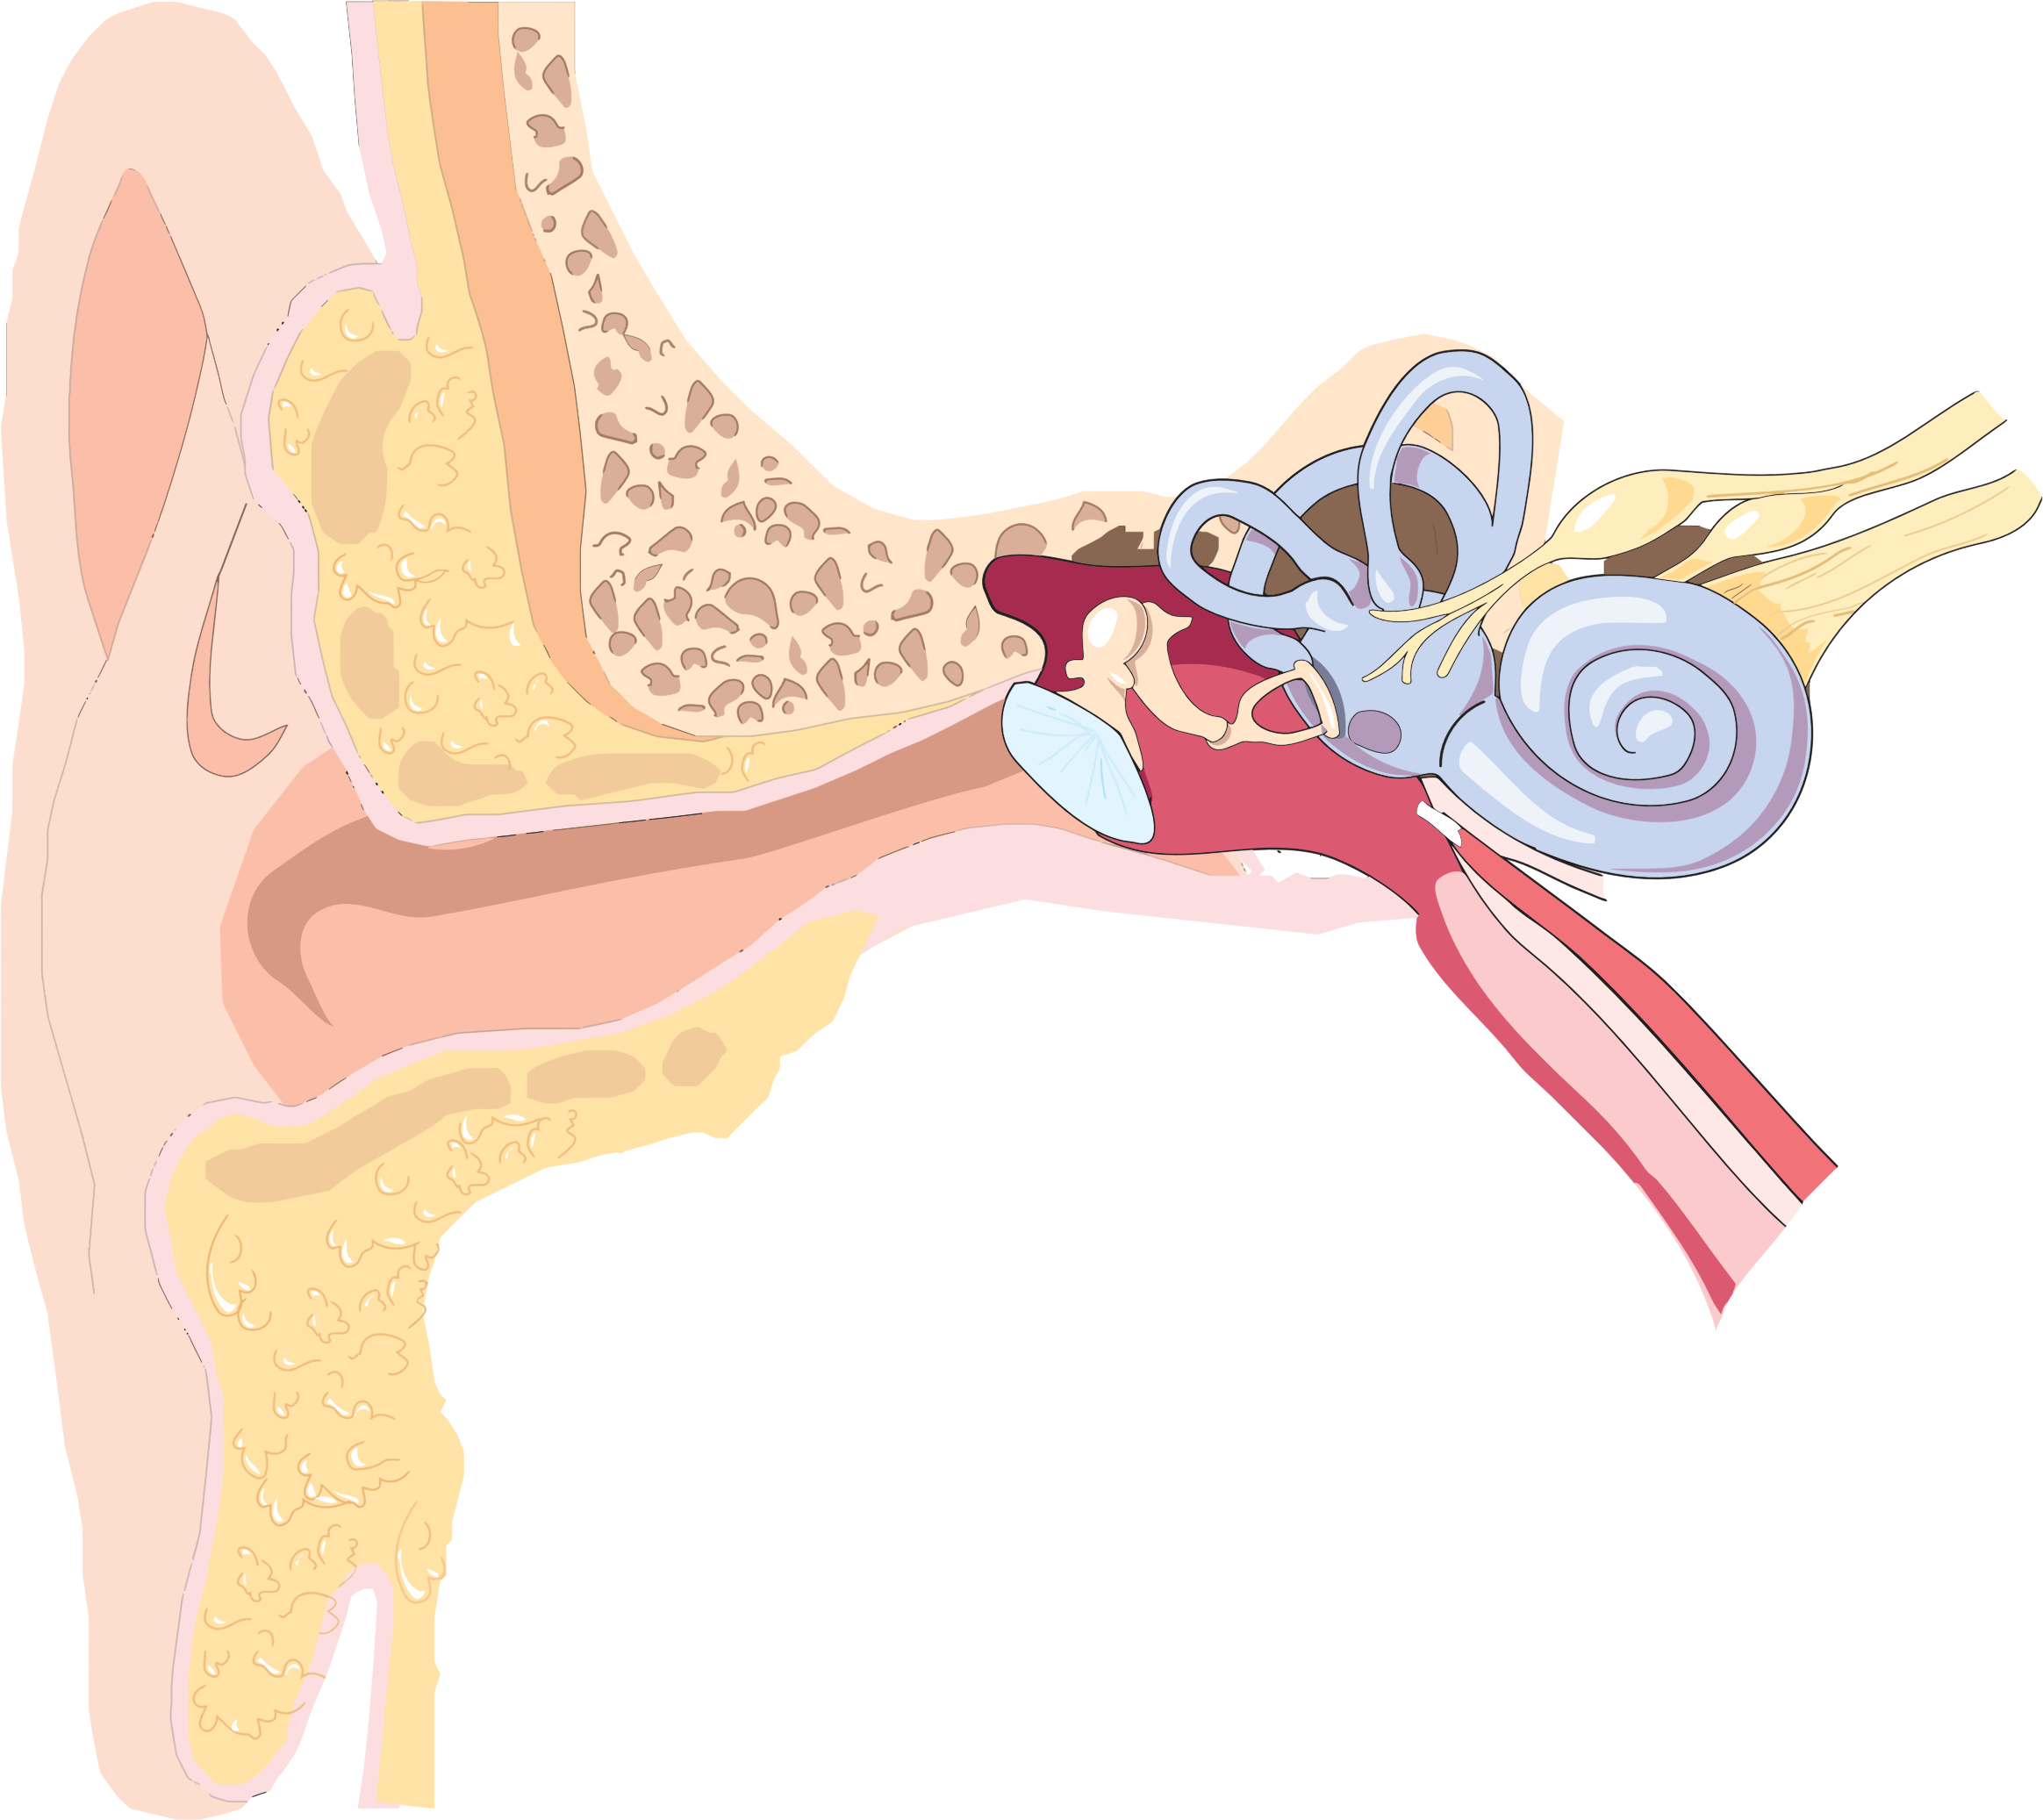 Ear clipart nose. Anatomy big image png